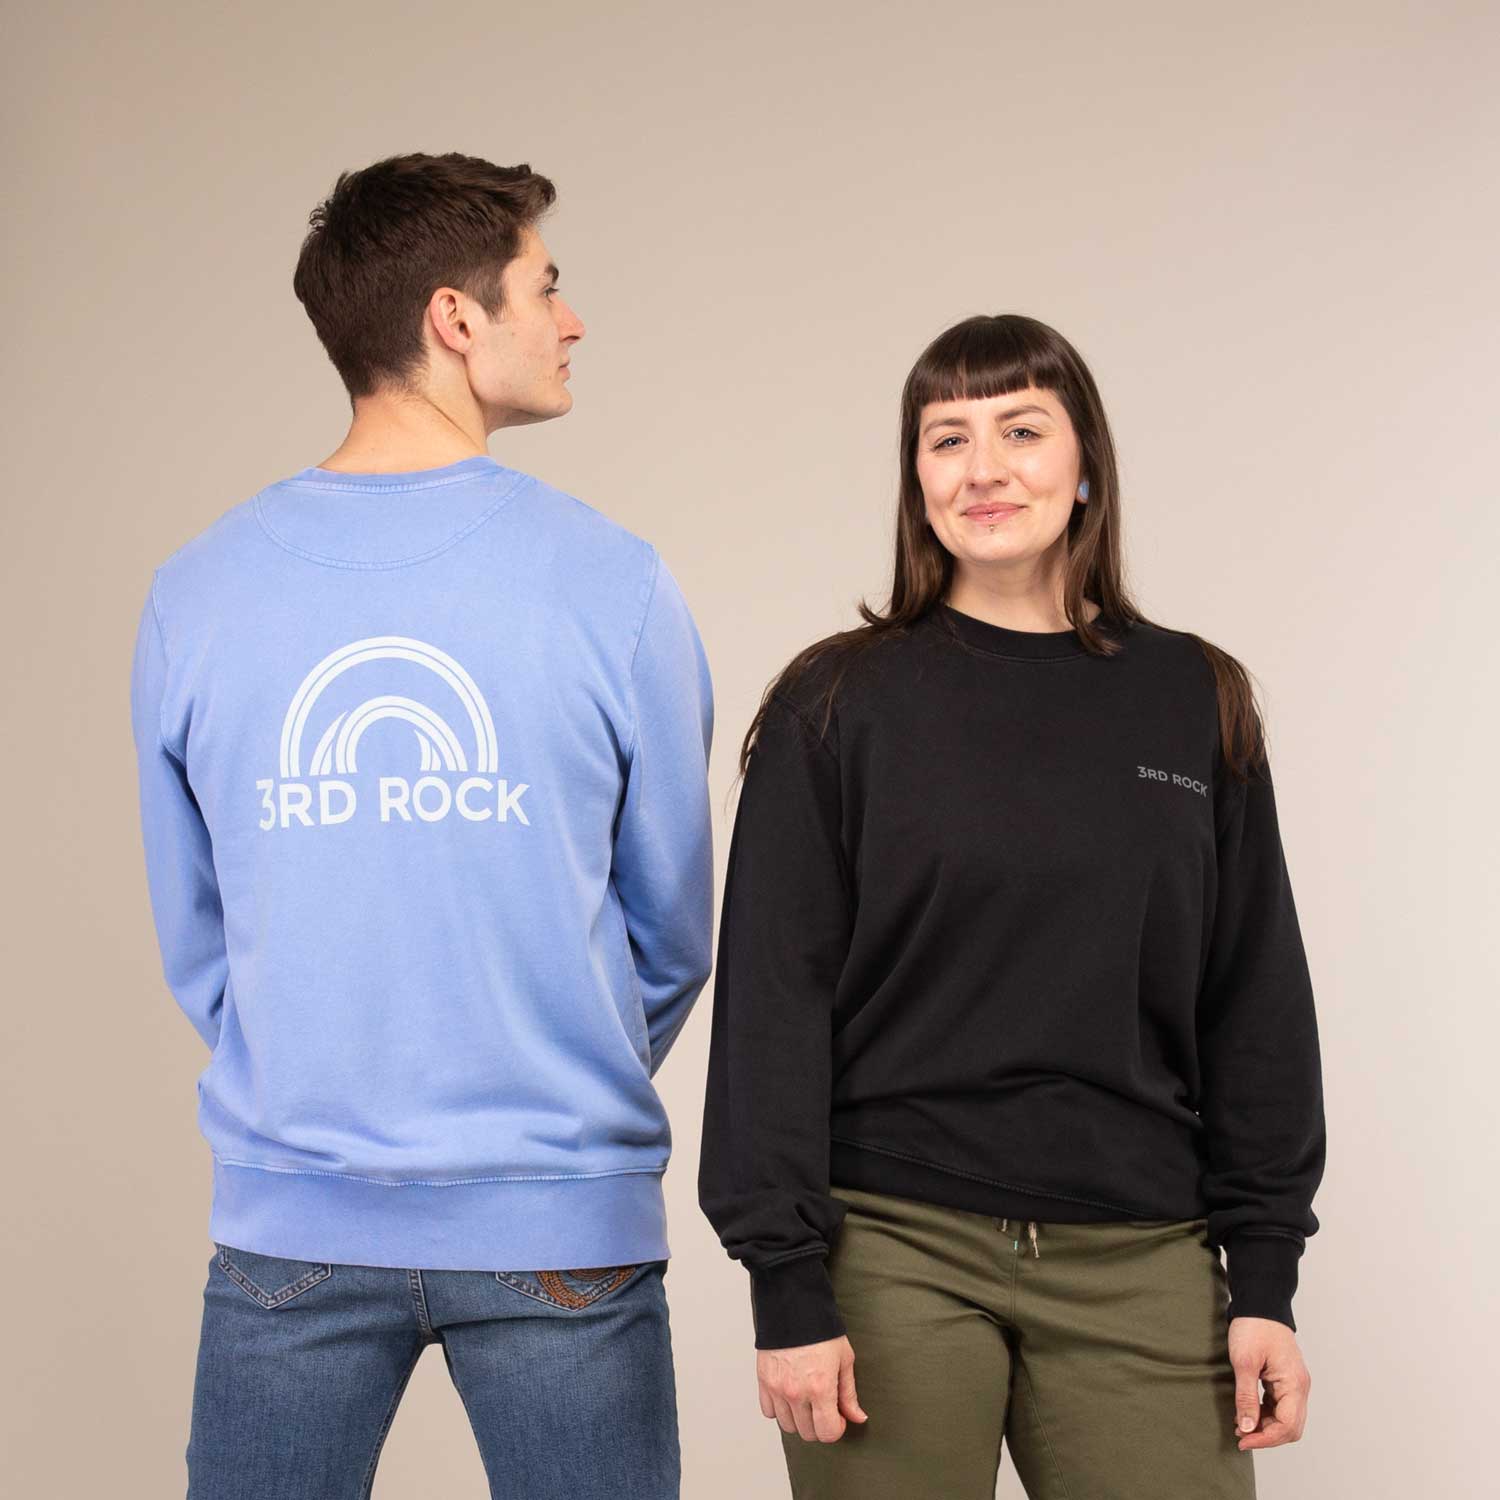 BELLAMY SWEATSHIRT |  Organic Cotton Sweatshirt | 3RD ROCK Clothing -  Laura is 5ft 6 with a 36" bust and wears a size M Billy is 5ft 11 with a 41" chest and wears a size L